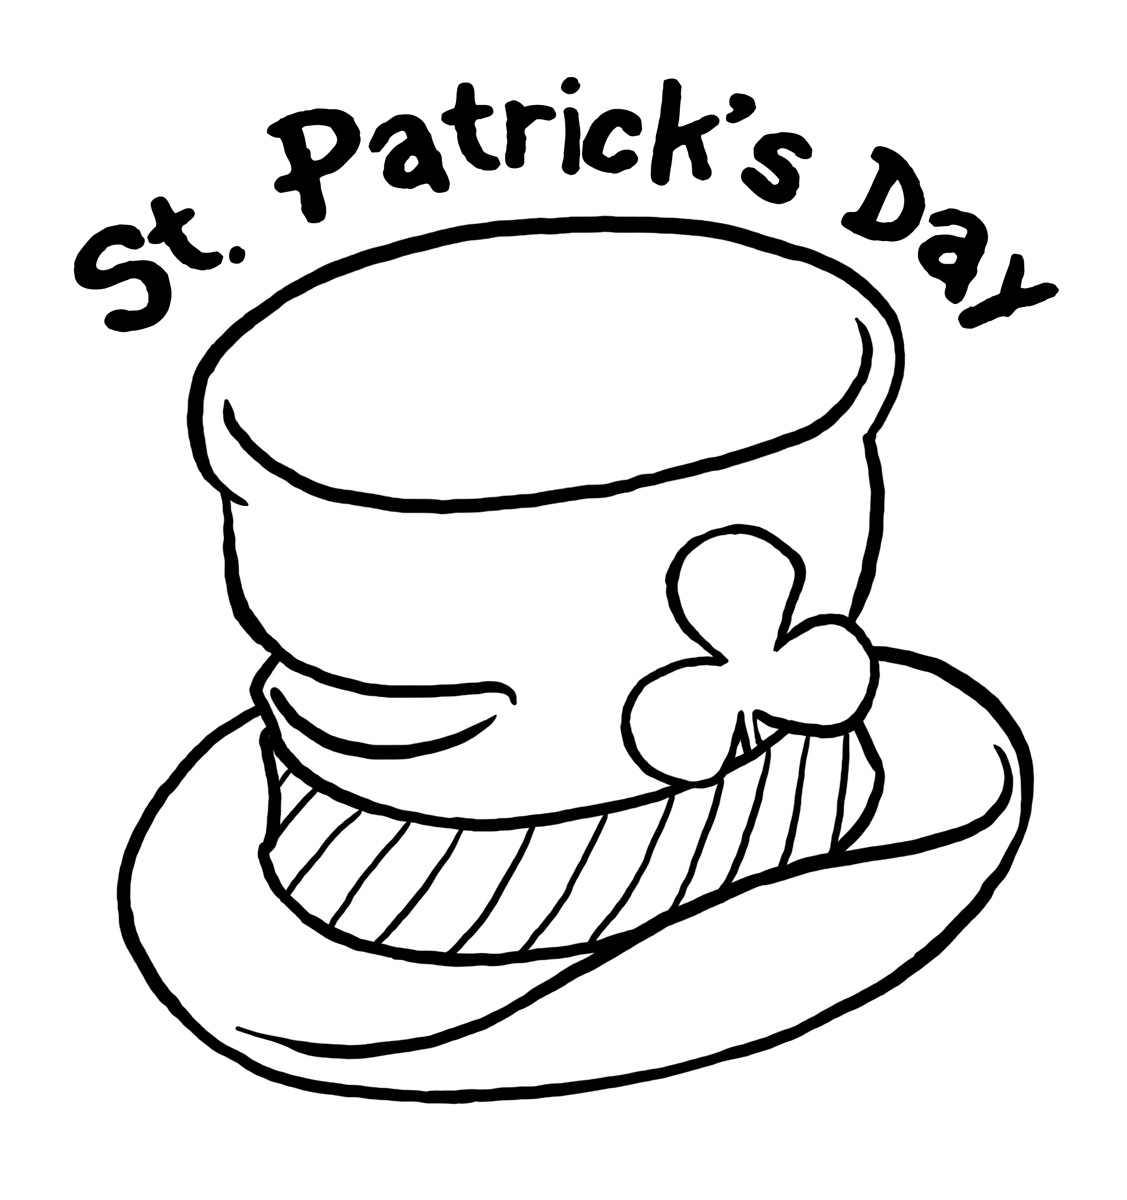 St Patricks Day Coloring Pages | St. Patrick&amp;#039;s Day Coloring Pages - Free Printable St Patrick Day Coloring Pages